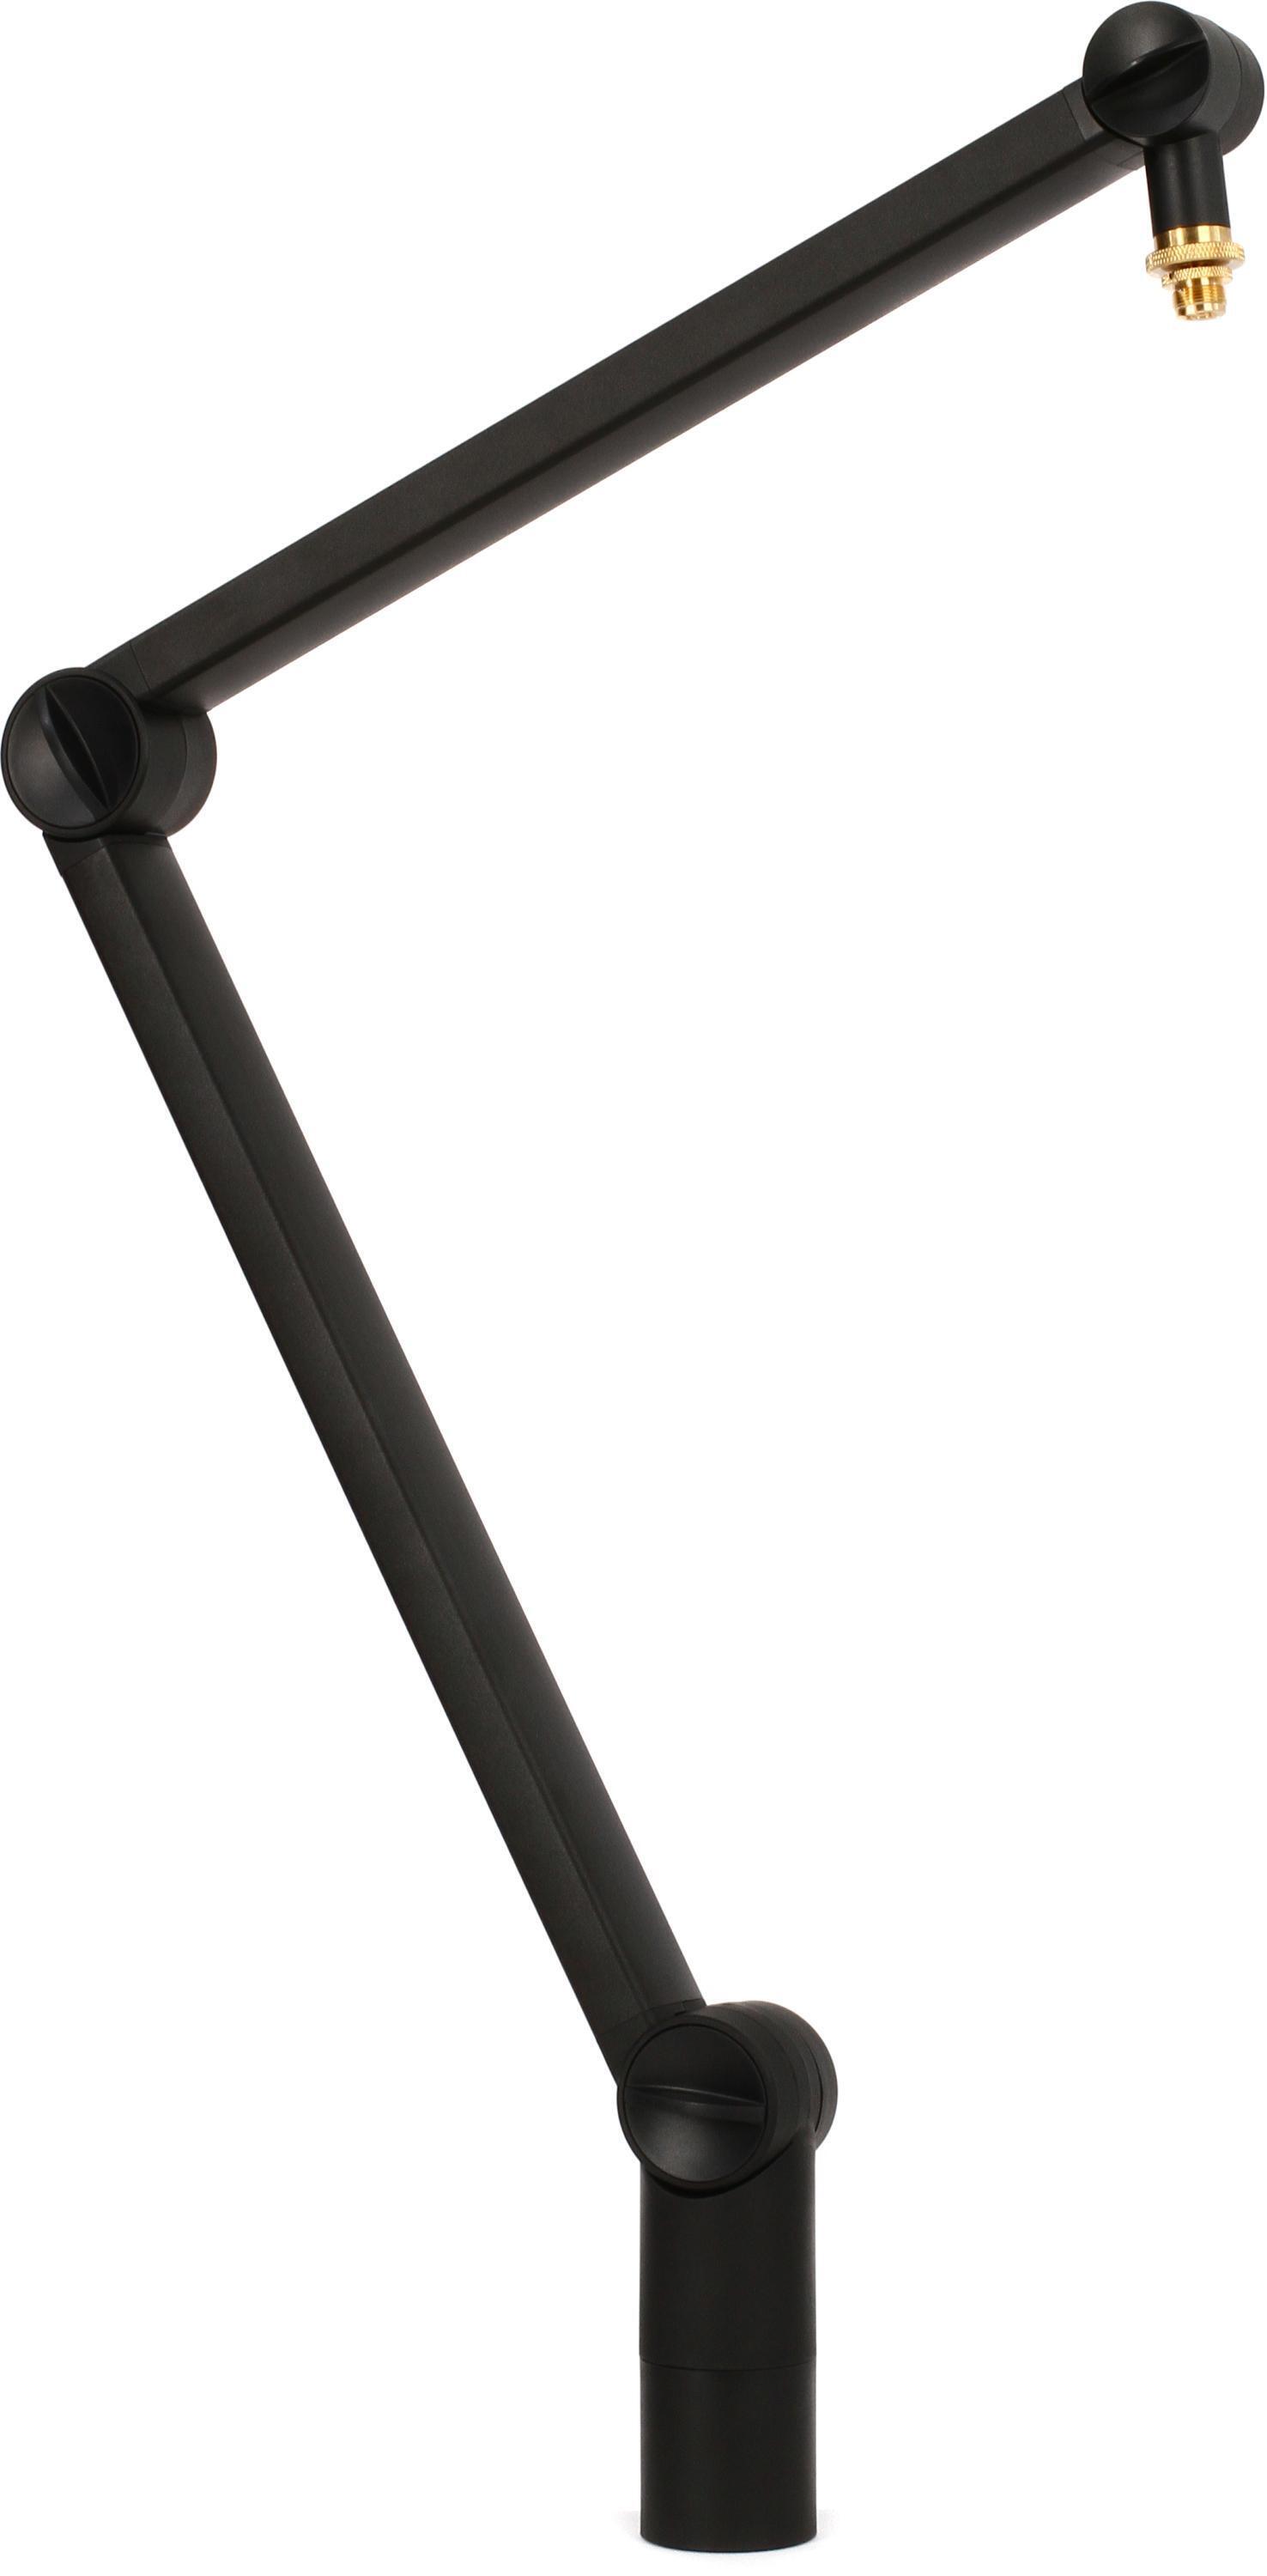 Blue Compass Boom Arm - A Premium Mic Arm With Some Things To Be Aware Of 